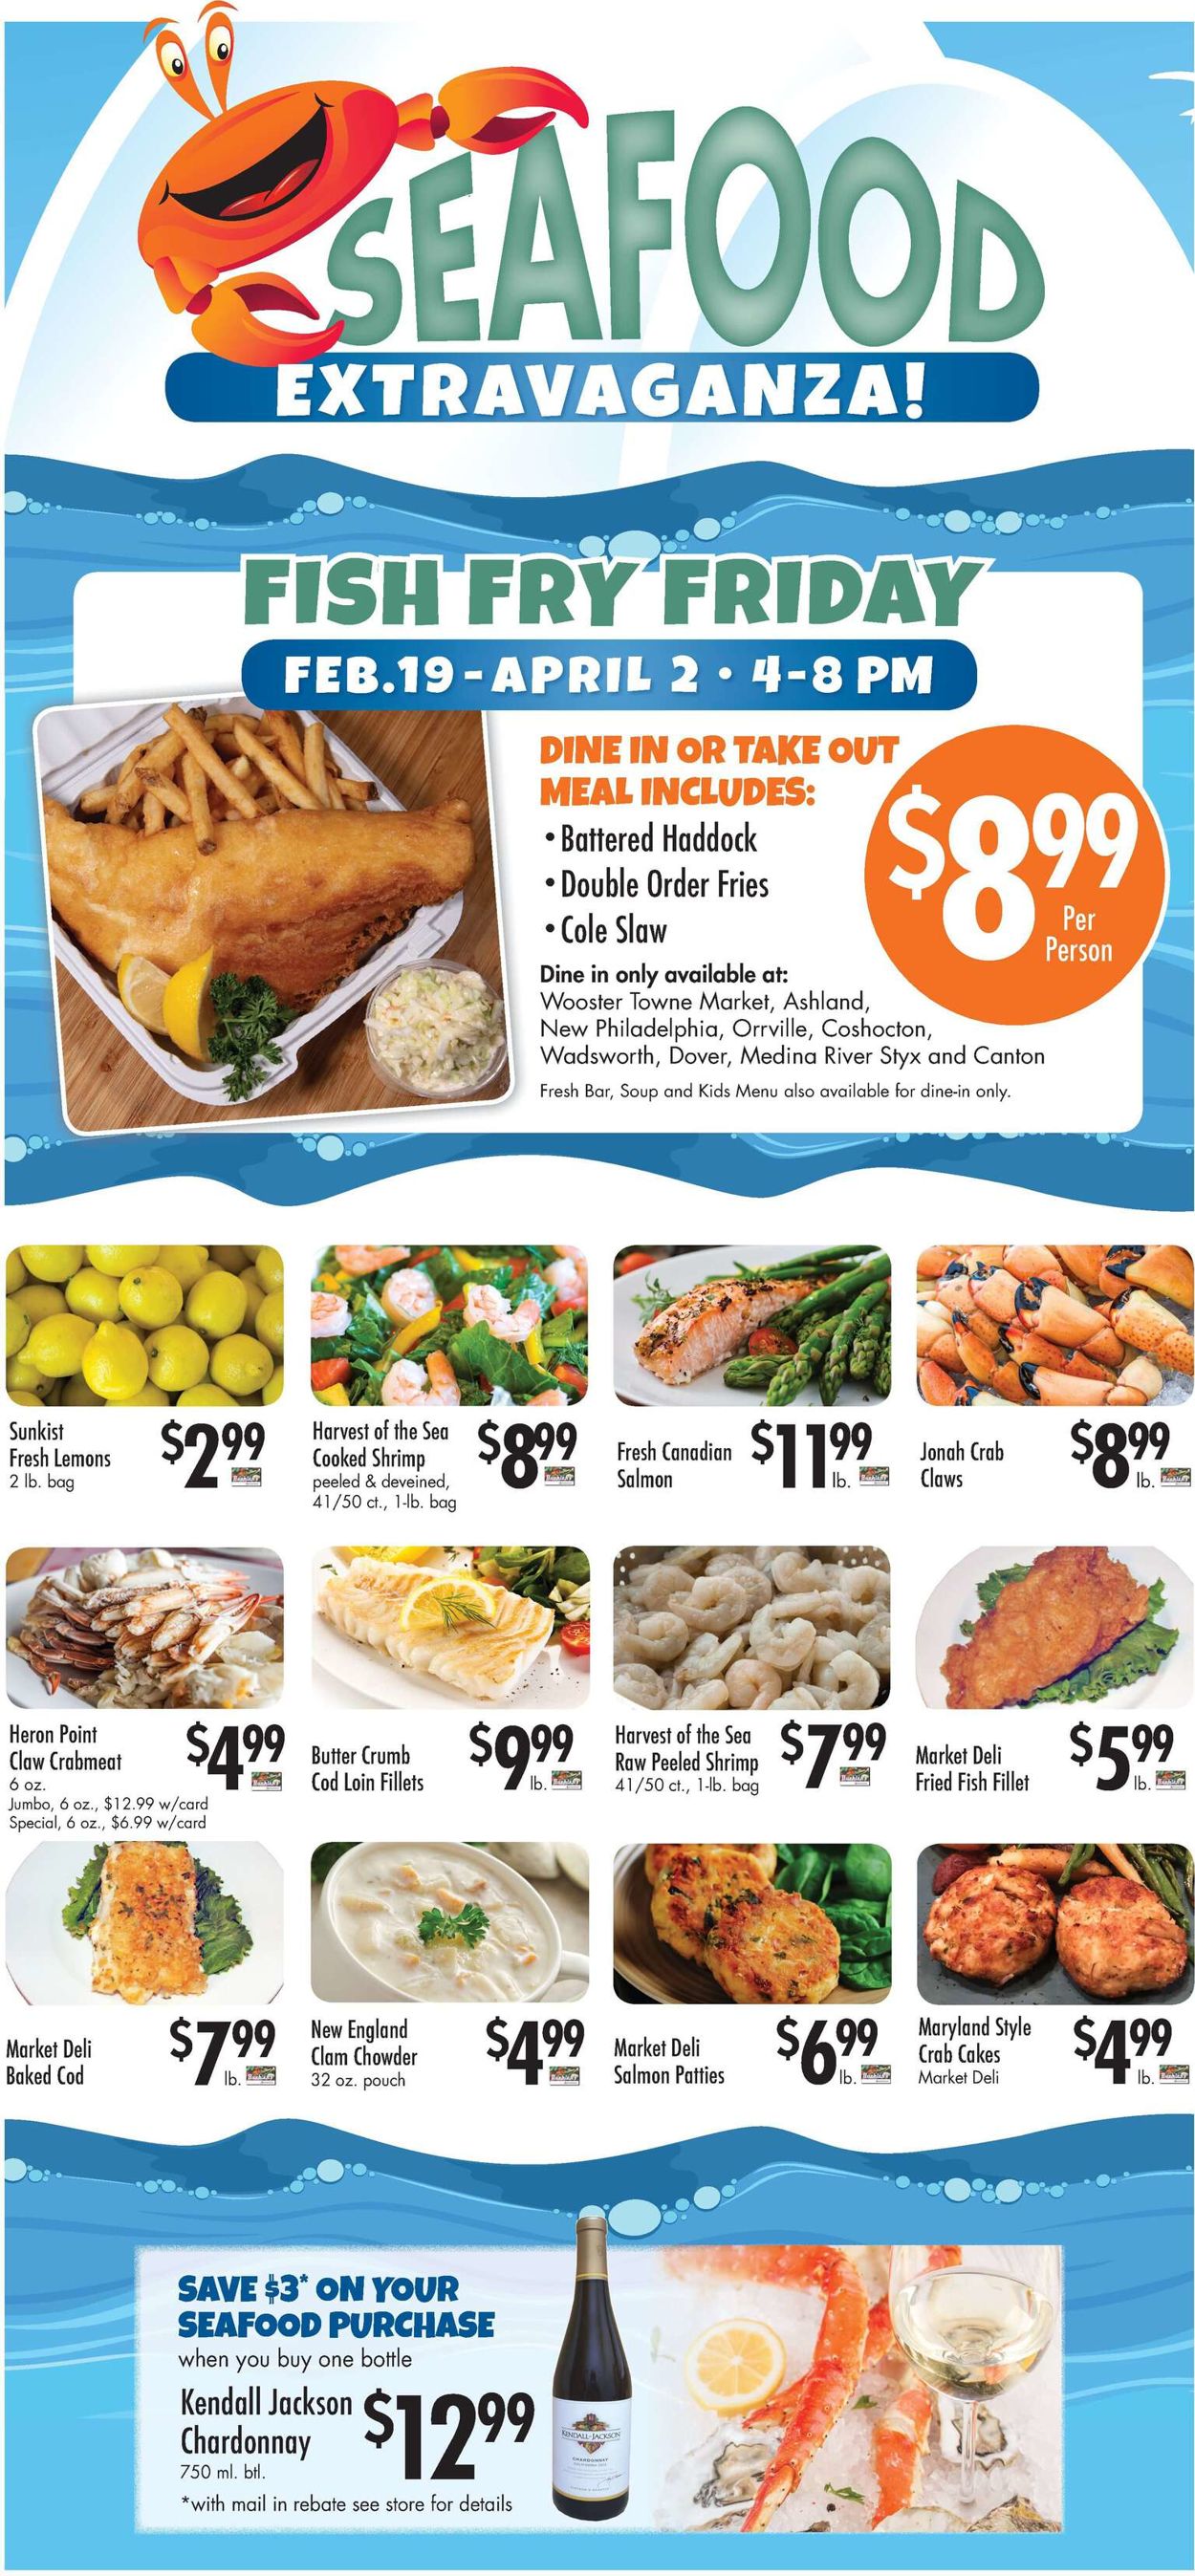 Catalogue Buehler's Fresh Foods from 03/03/2021